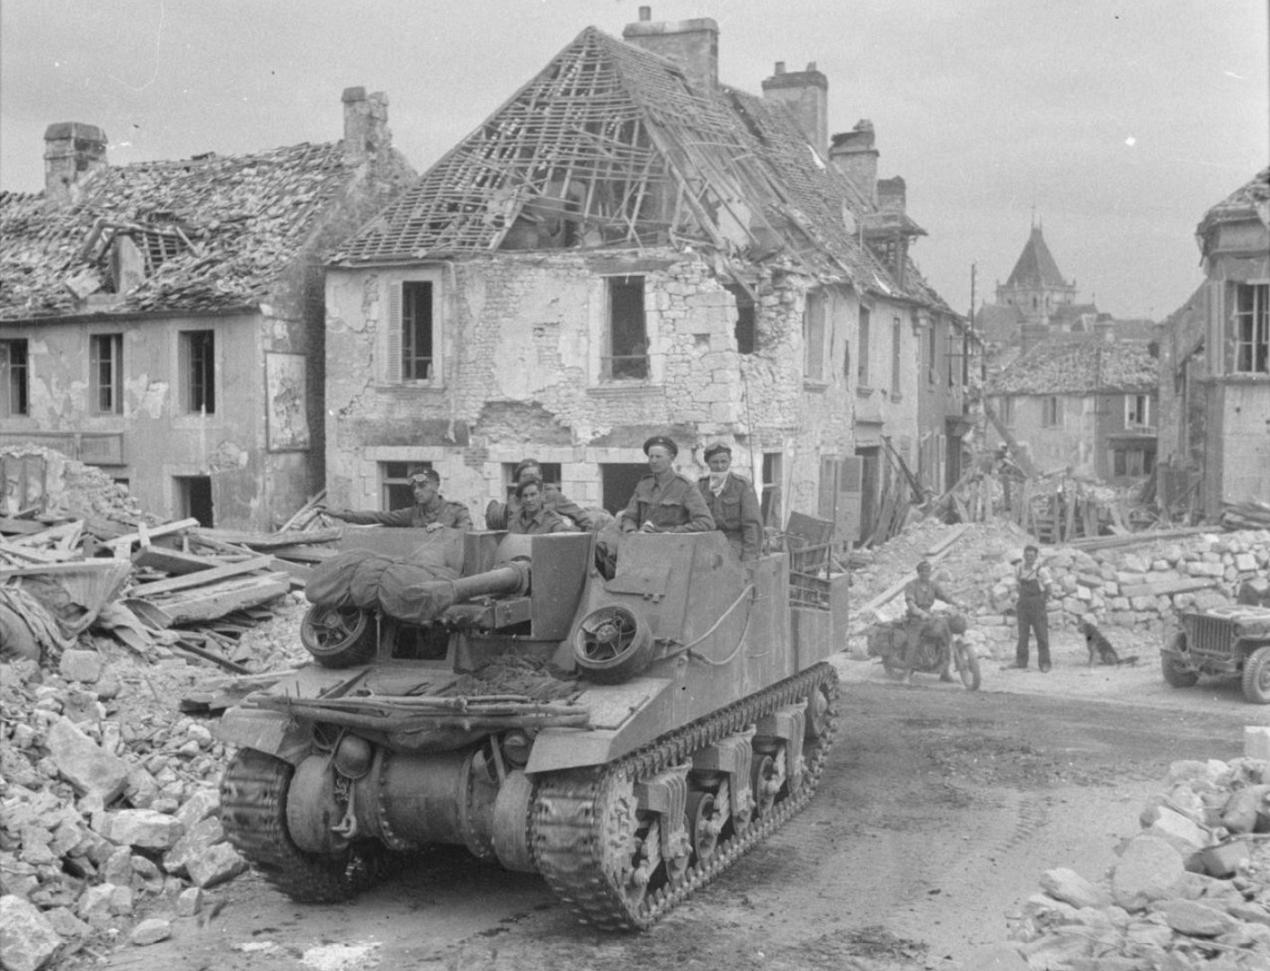 A Sexton self-propelled gun drives through the shattered village of Putanges, 20 August 1944.